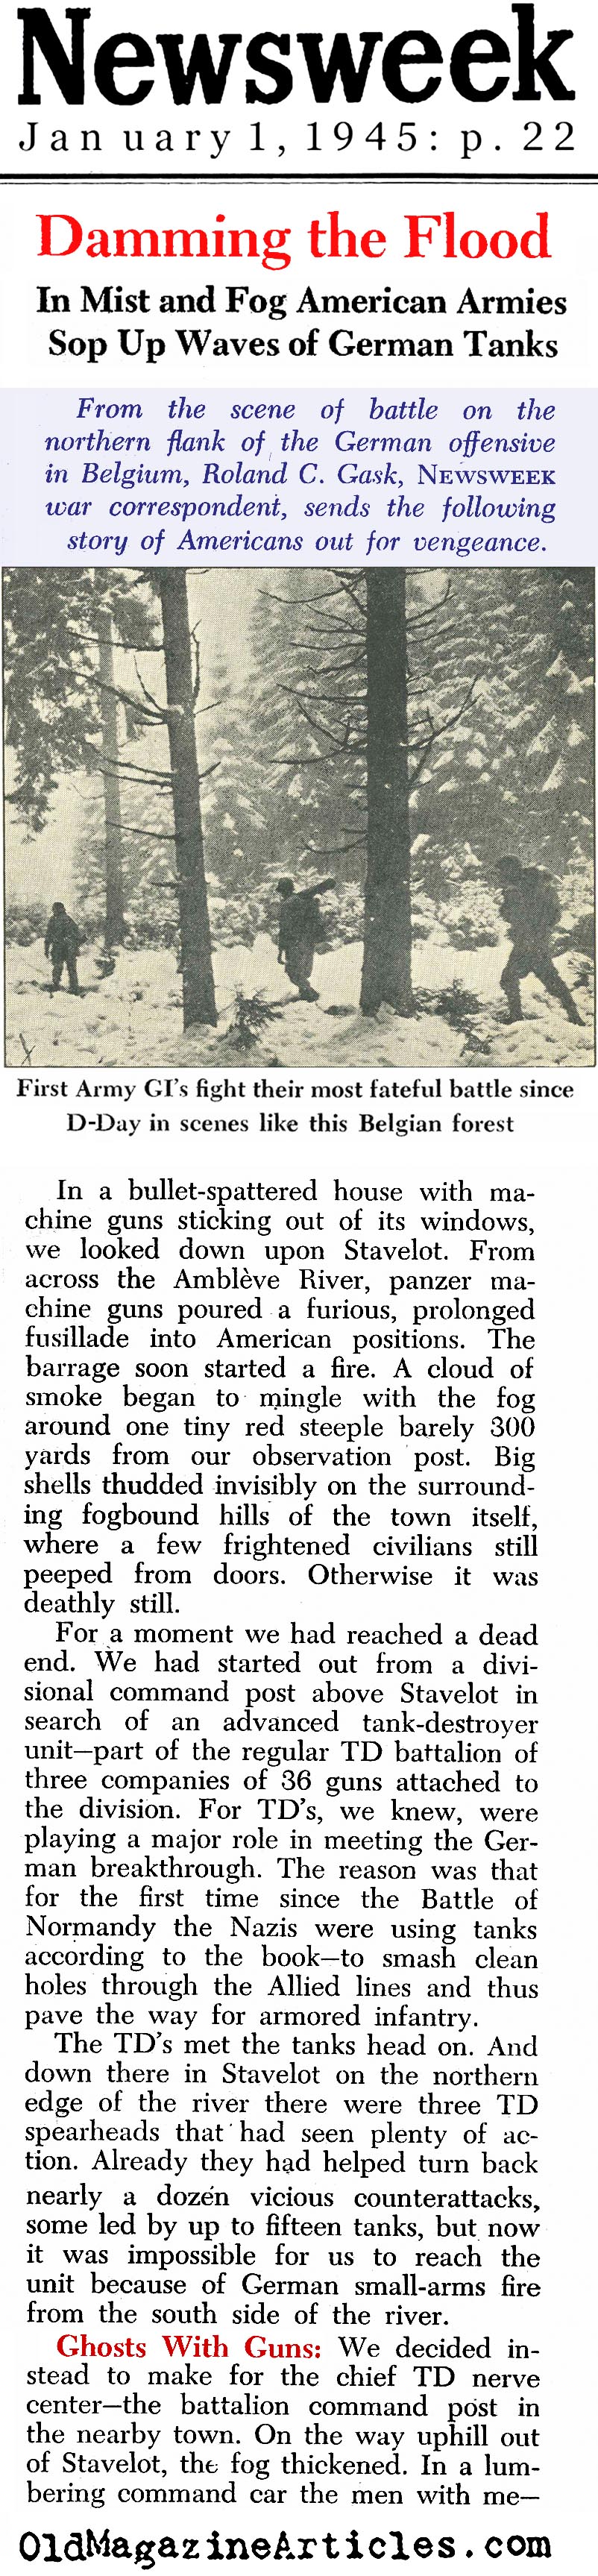 Killing Tiger Tanks in the Ardennes (Newsweek Magazine, 1945)